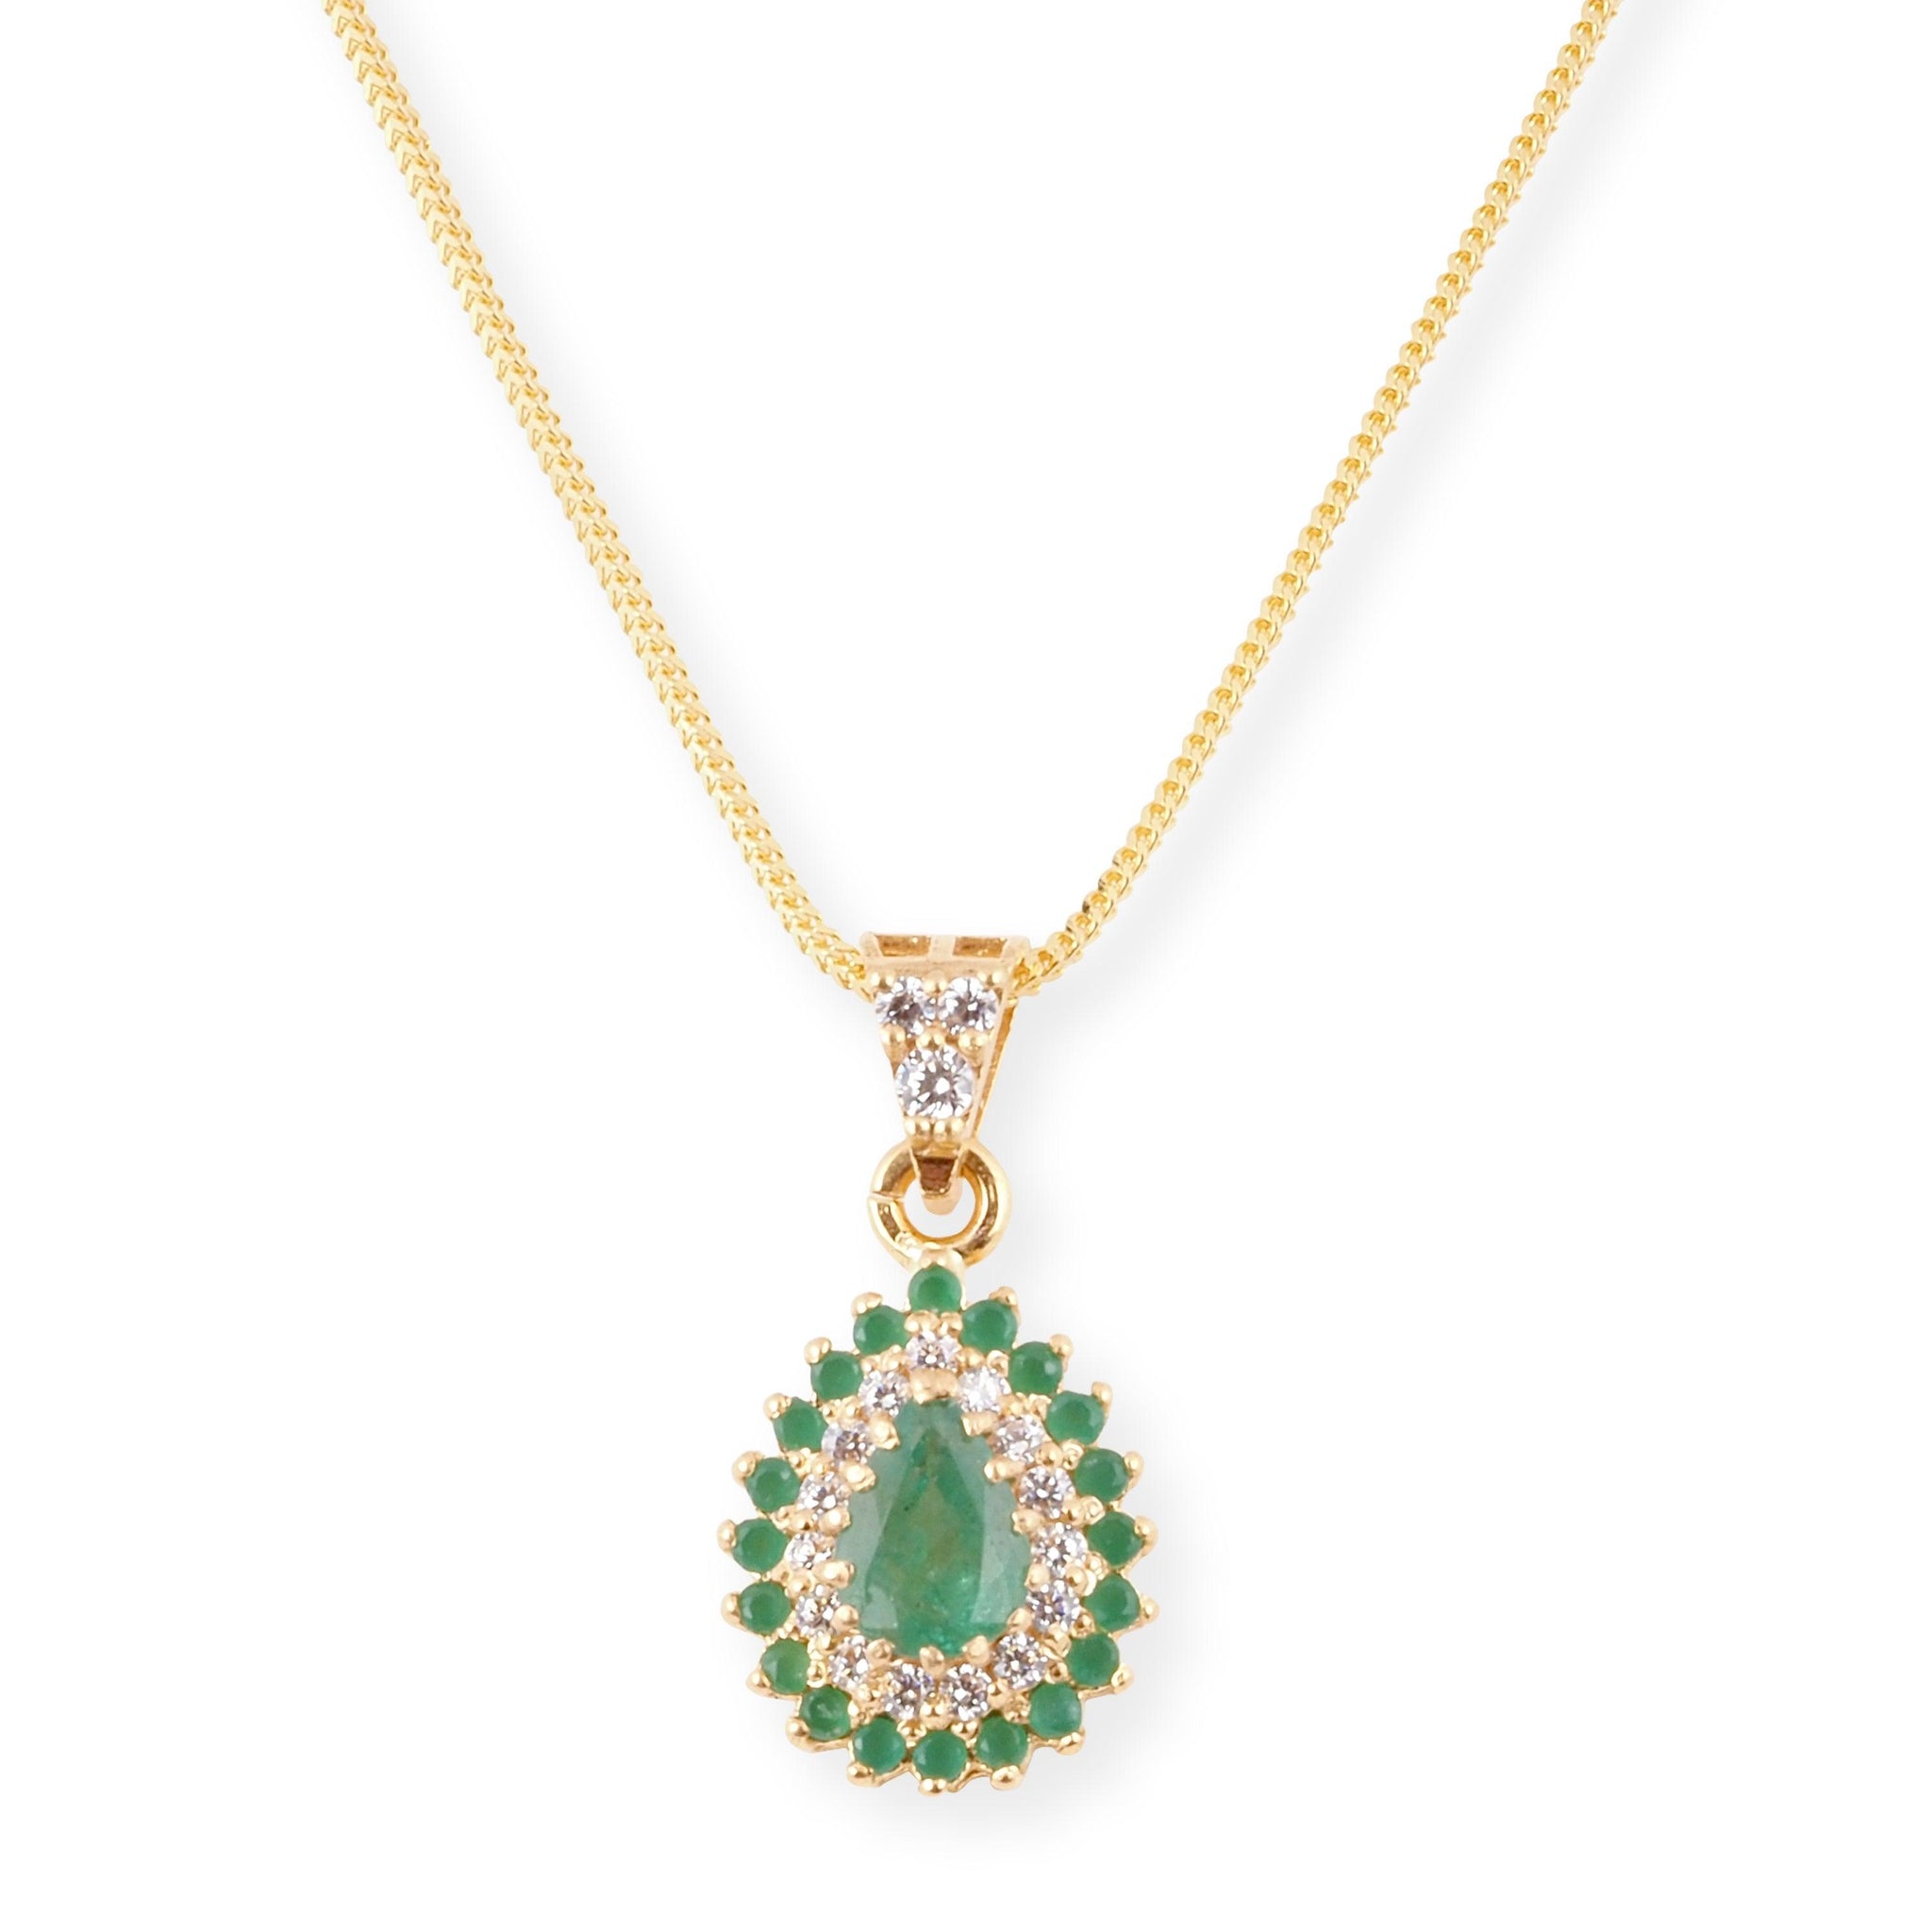 22ct Gold Set with Green and Cubic Zirconia Stones (Pendant + Chain + Earrings) PE-8010